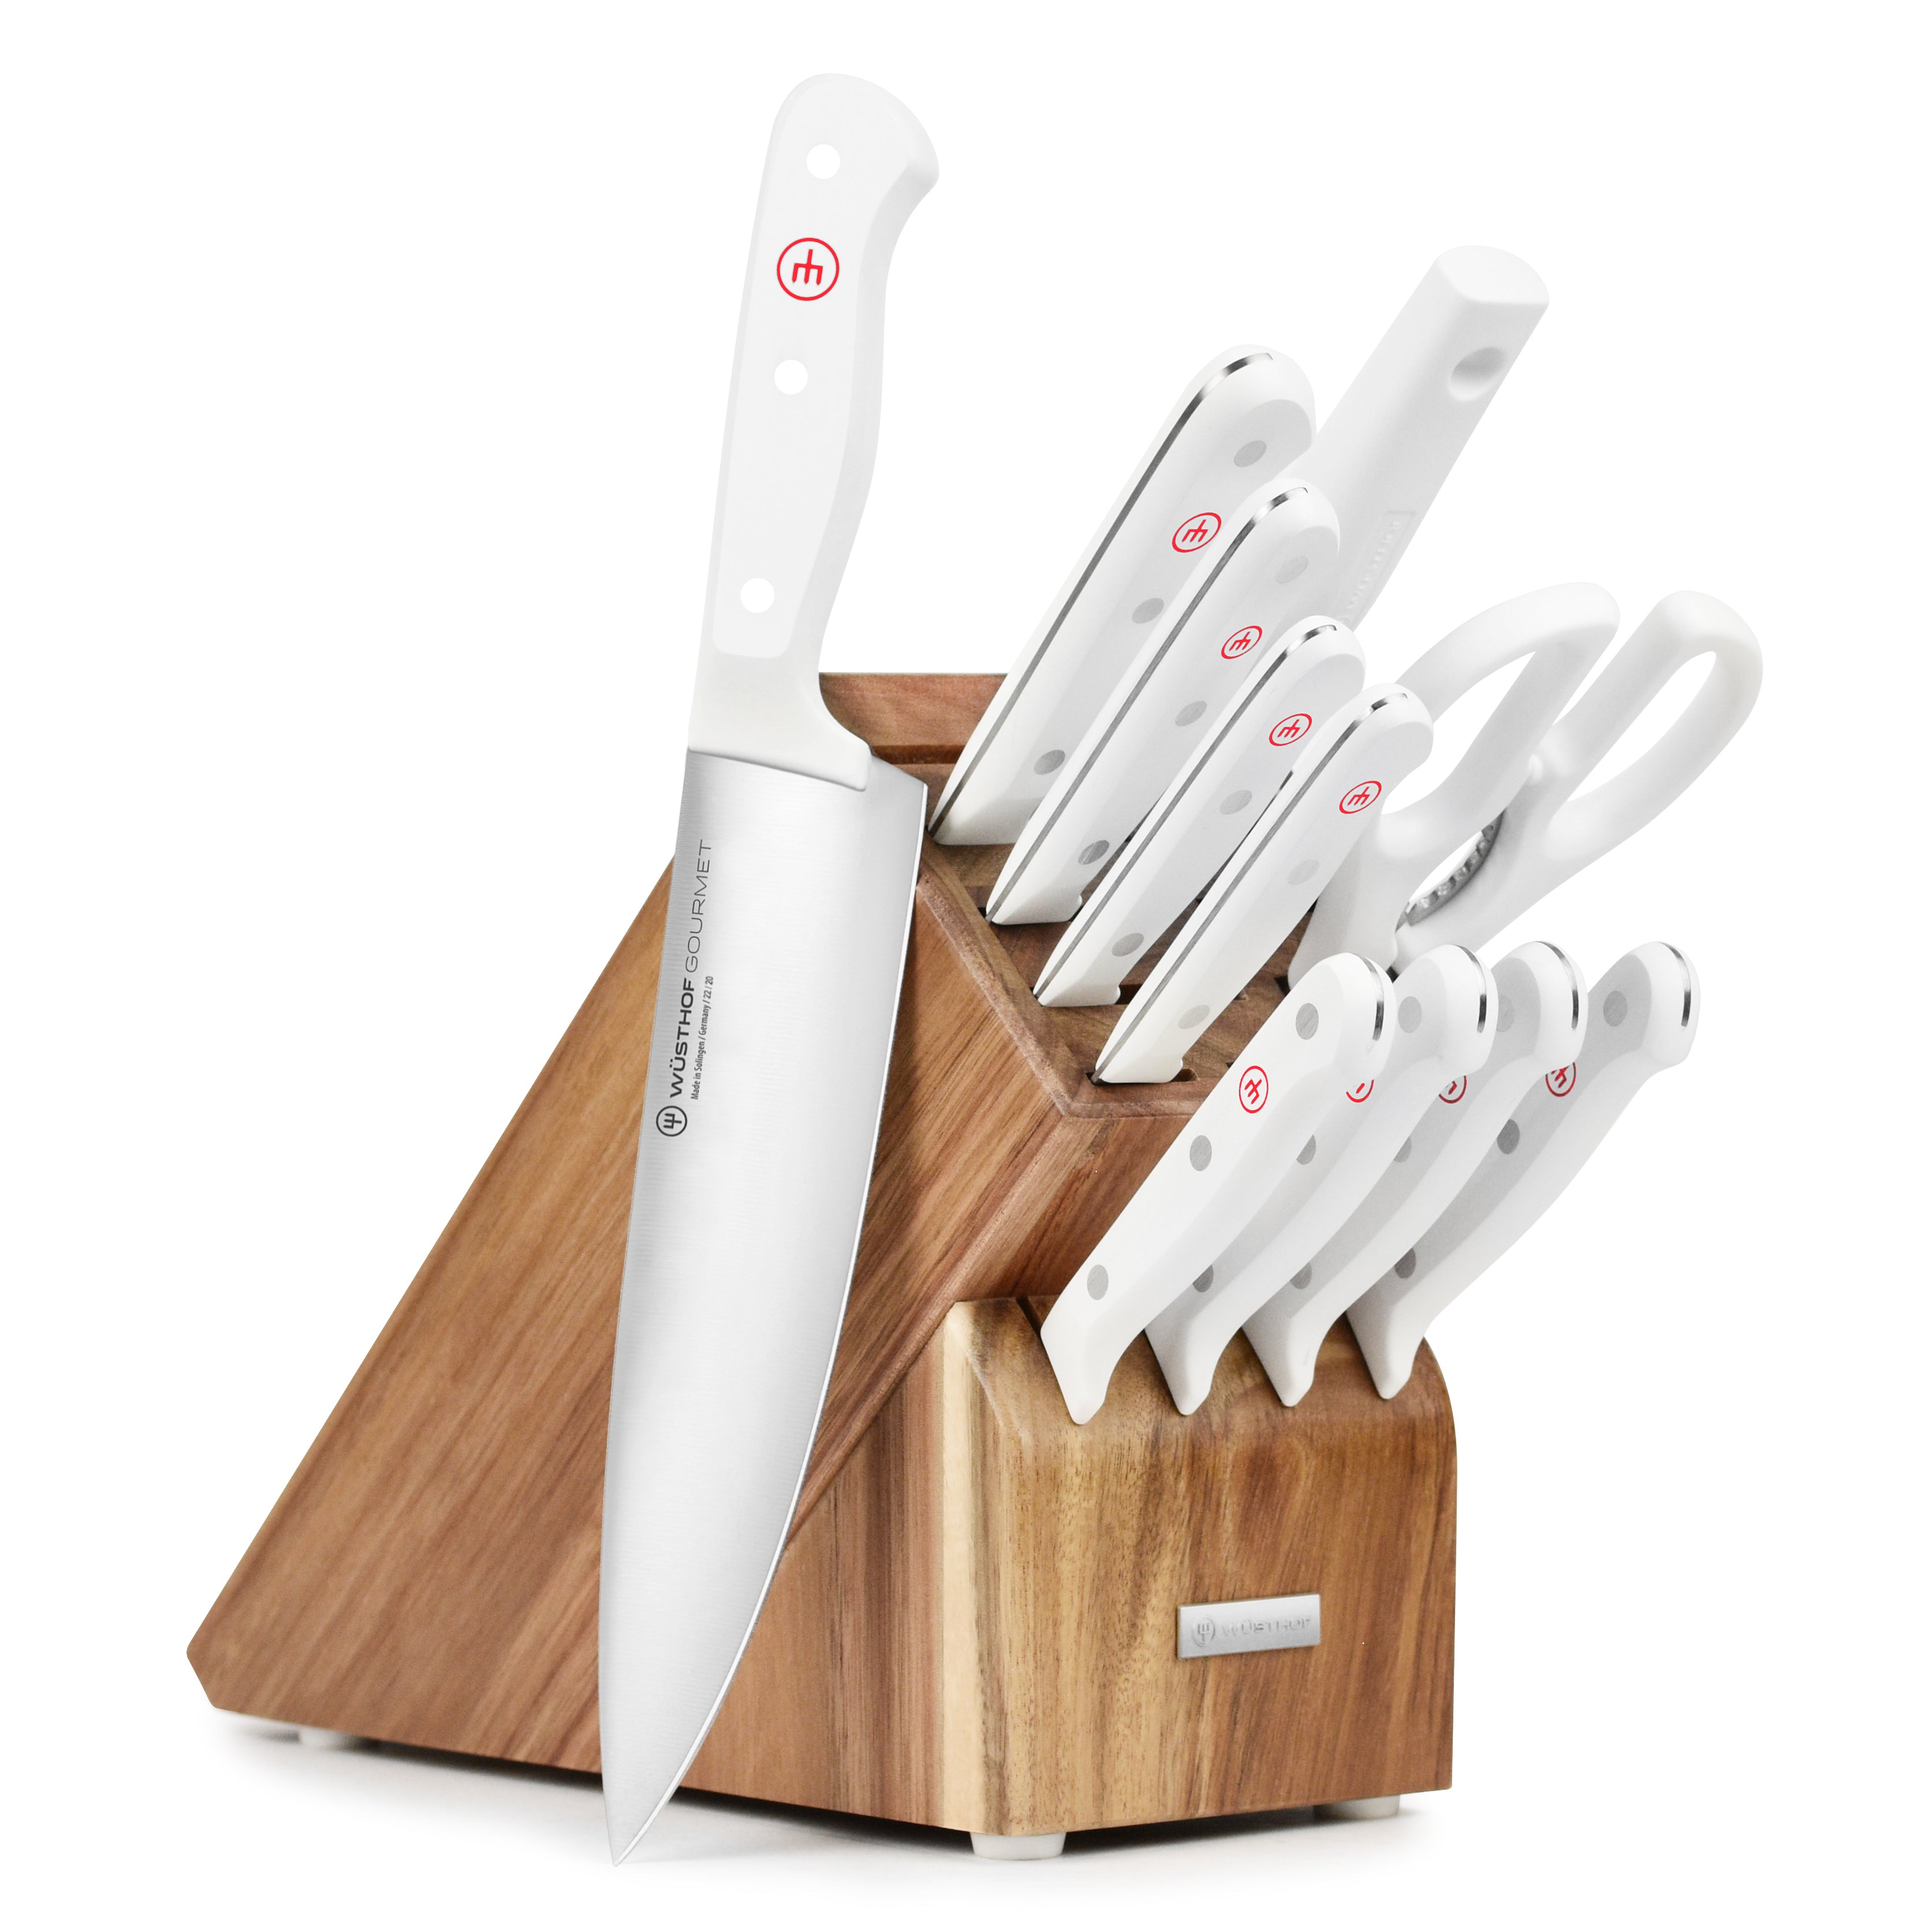 Wusthof Gourmet White Knife Set - 12 Piece Block – Cutlery and More